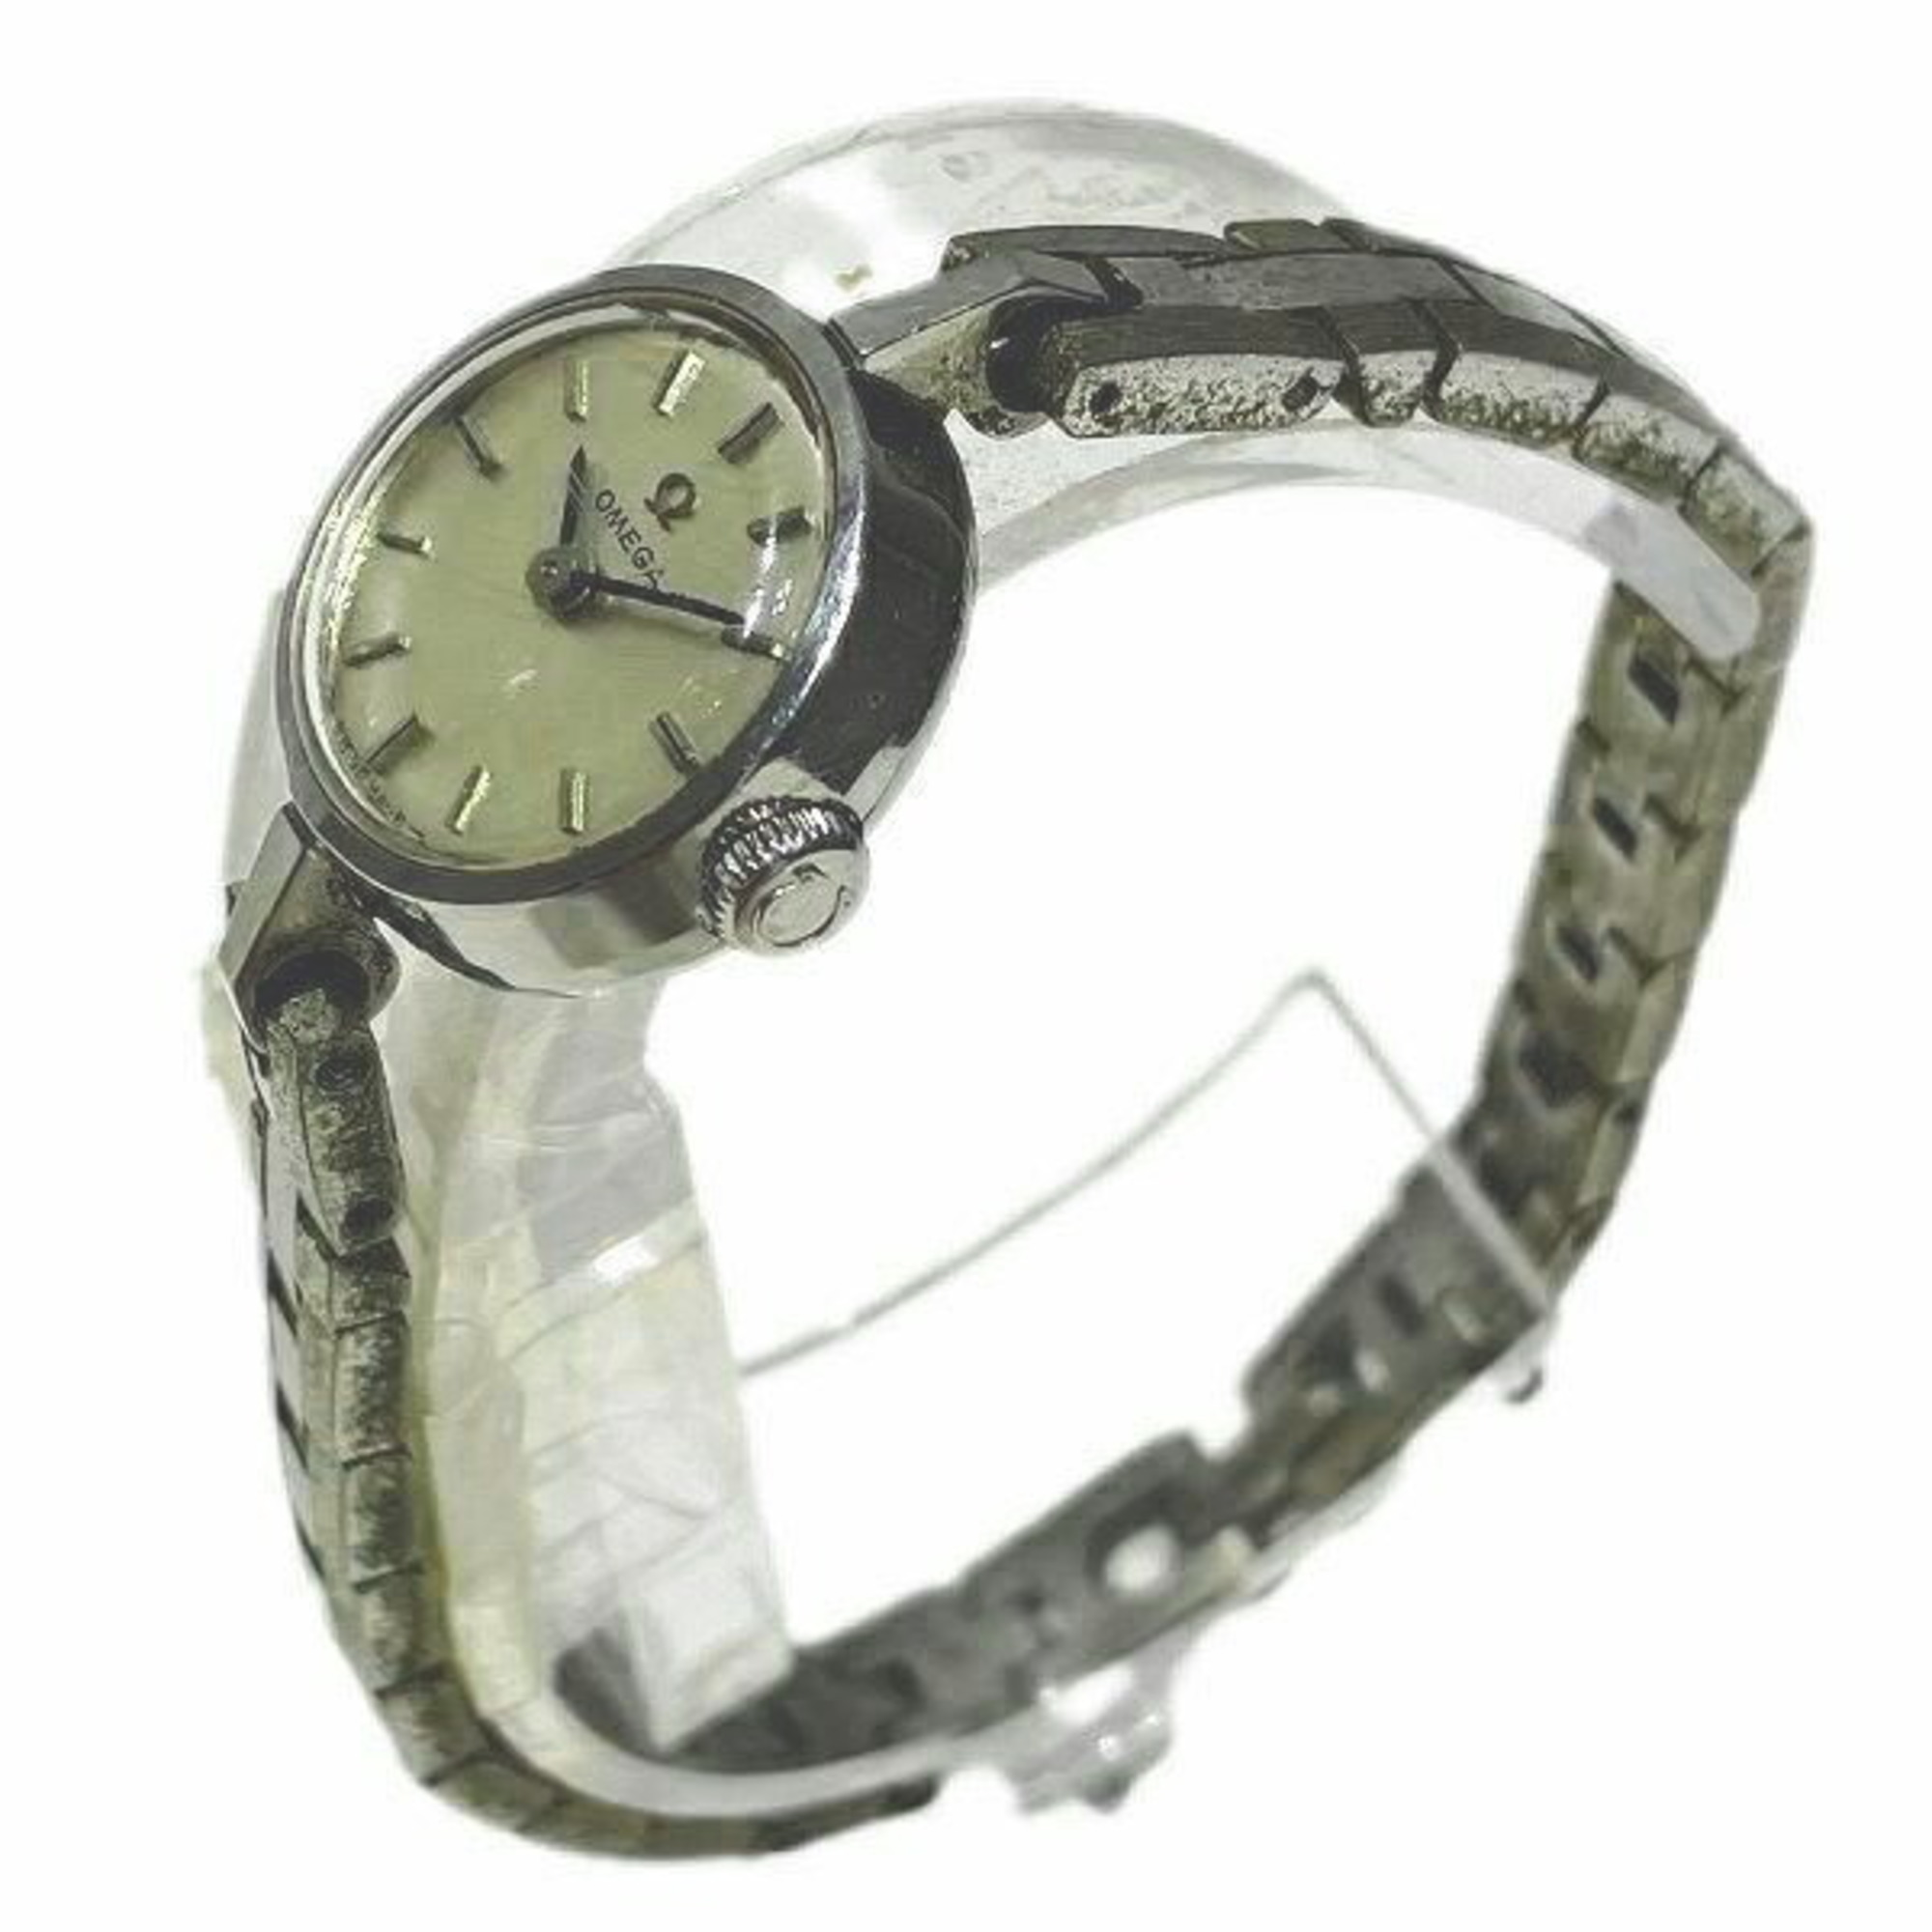 Omega manual winding watch silver dial ladies